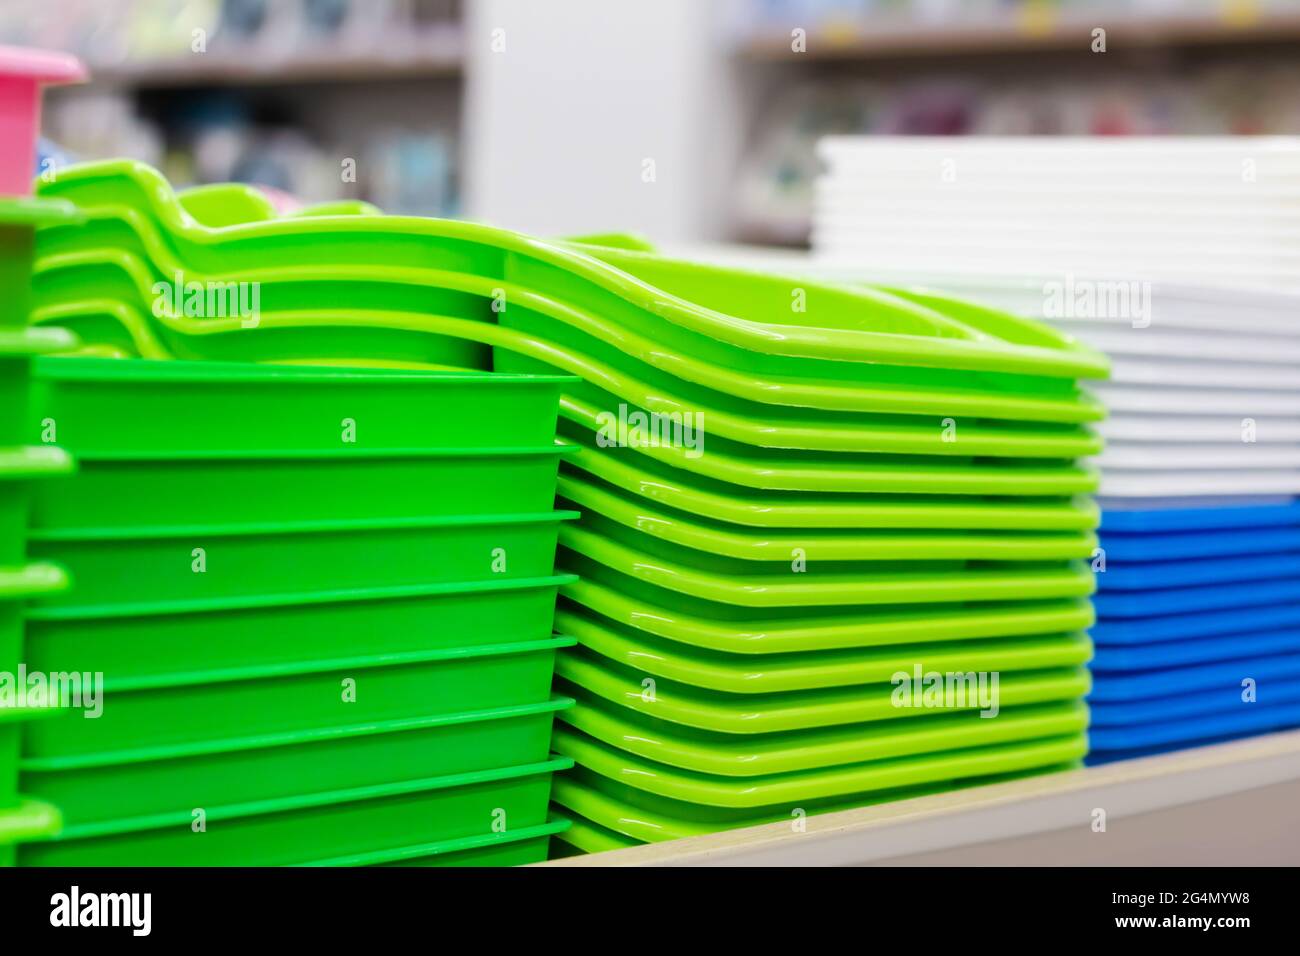 Photo of new packed multi colored plastic containers stacked on store shelf. Stock Photo